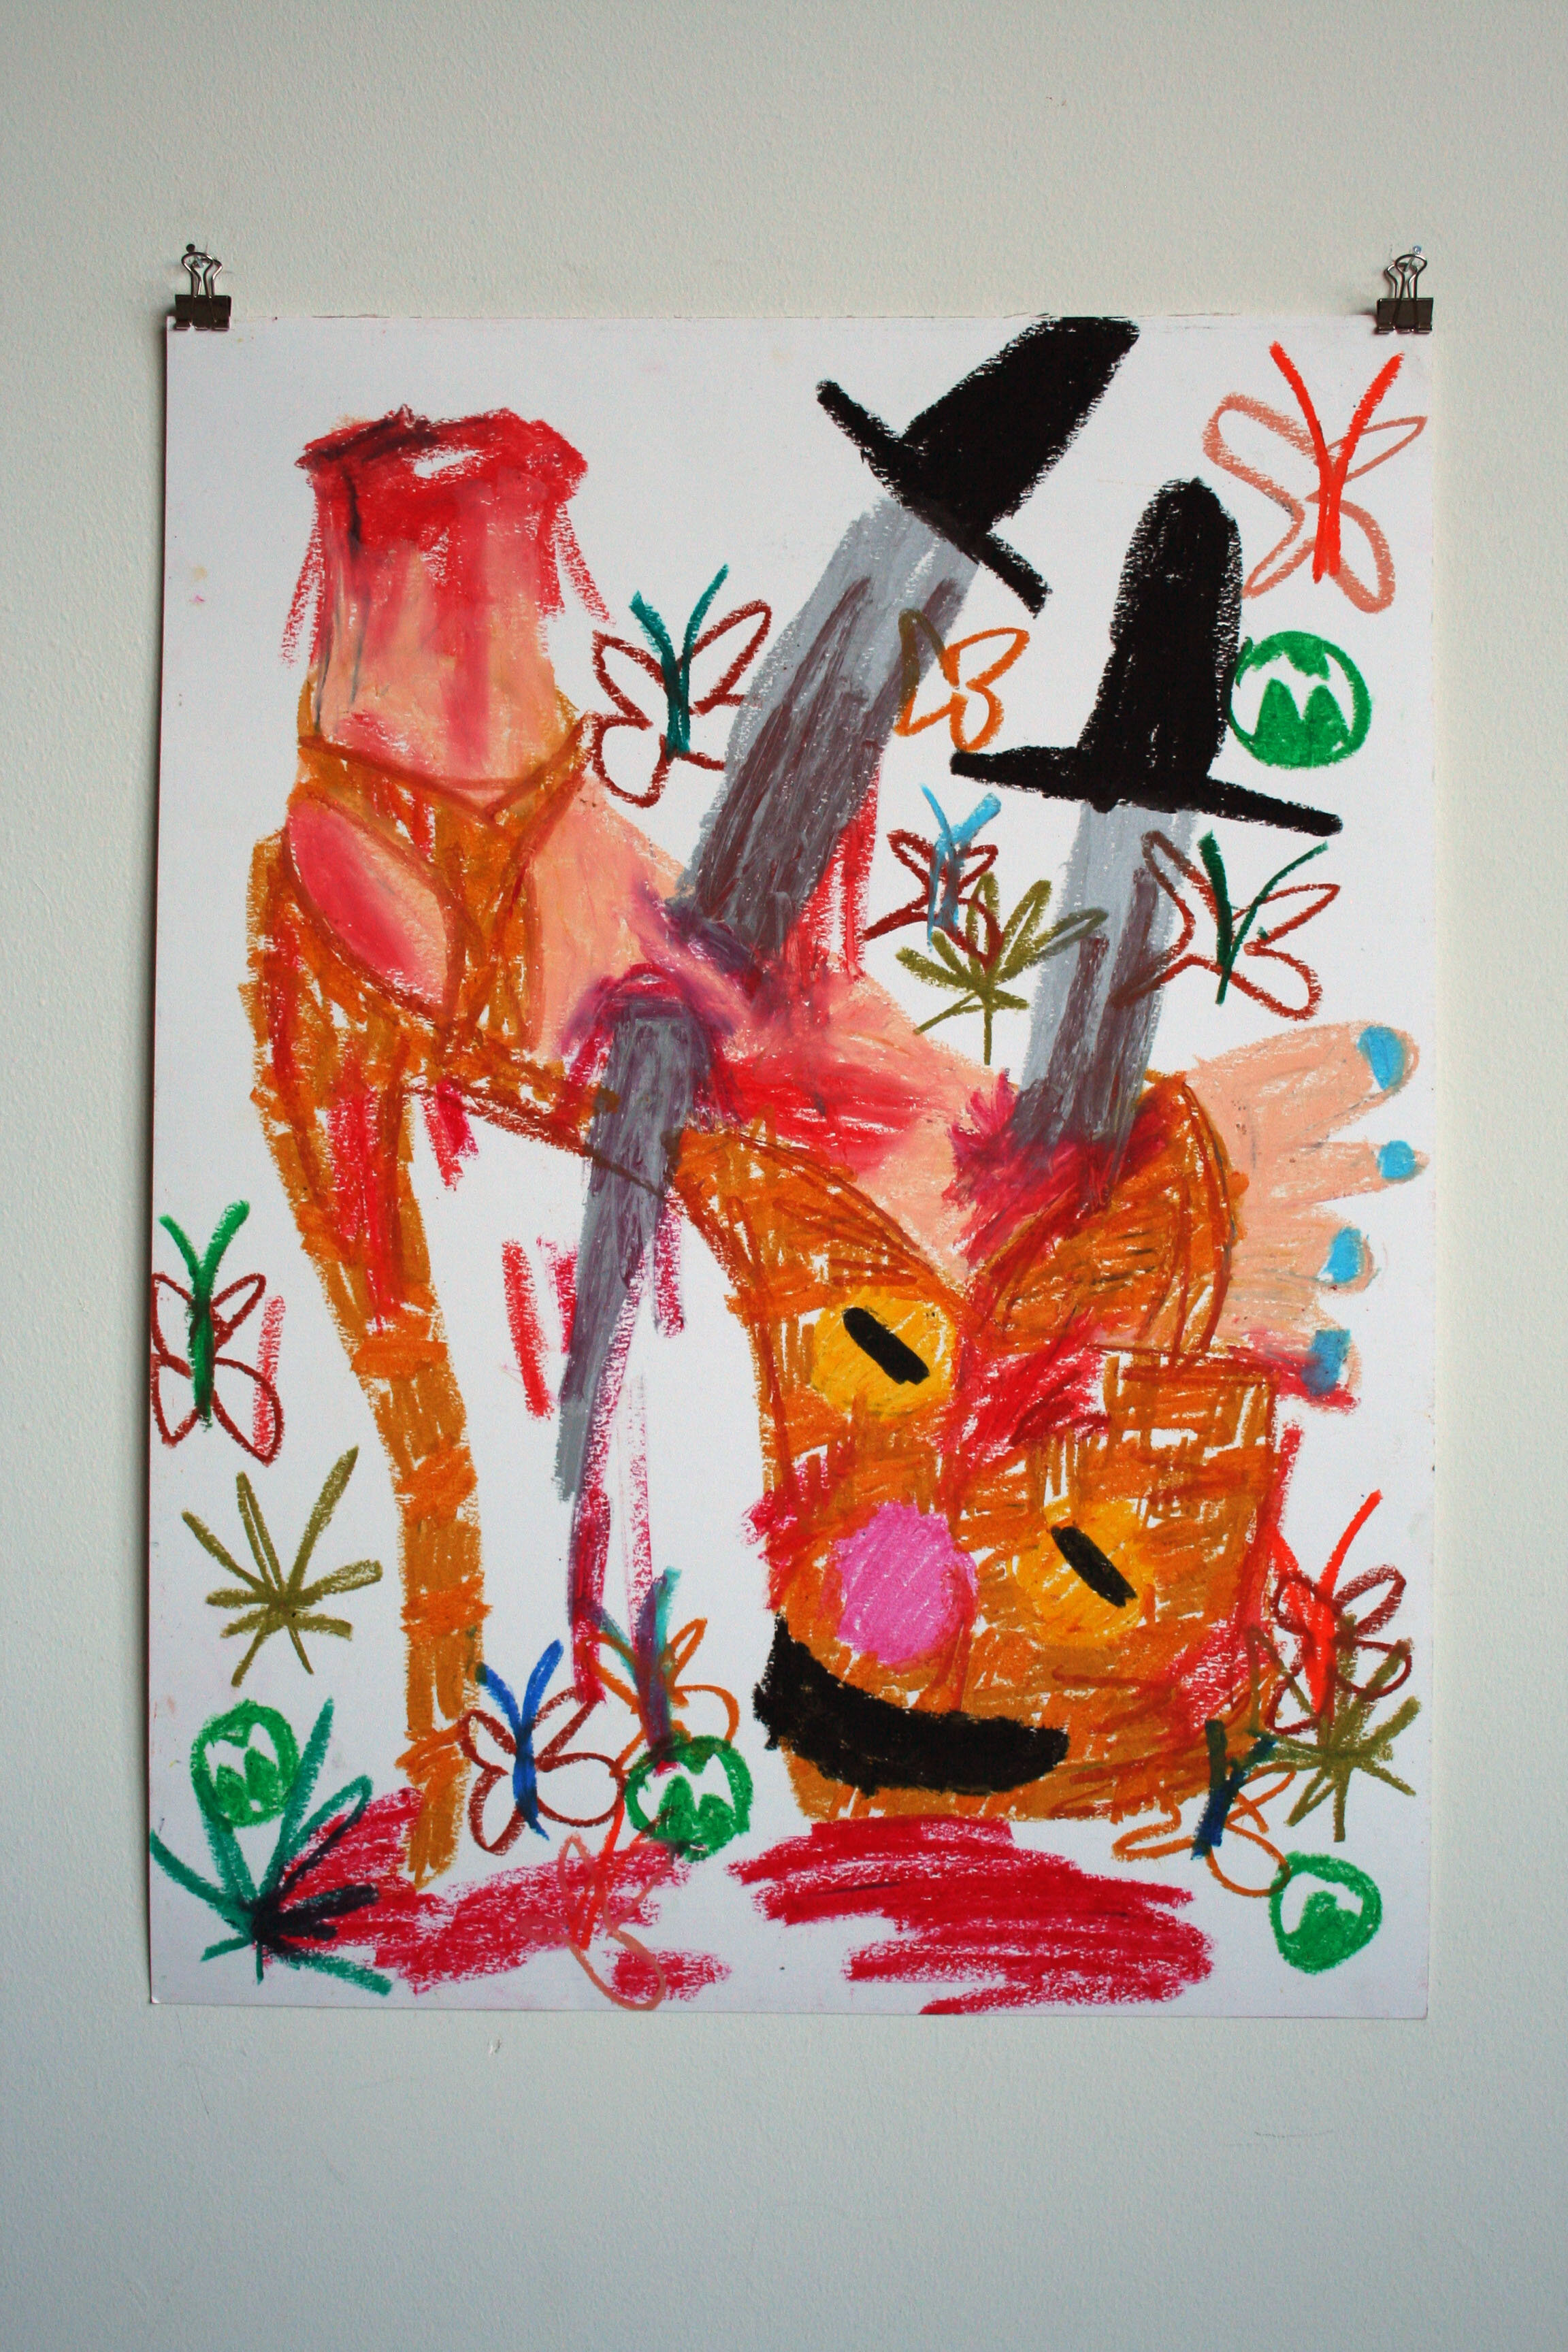   Severed Foot Wearing a Wicker Platform , 2014  24 x 18 inches (60.96 x 45.72 cm.)  Oil pastel on paper 